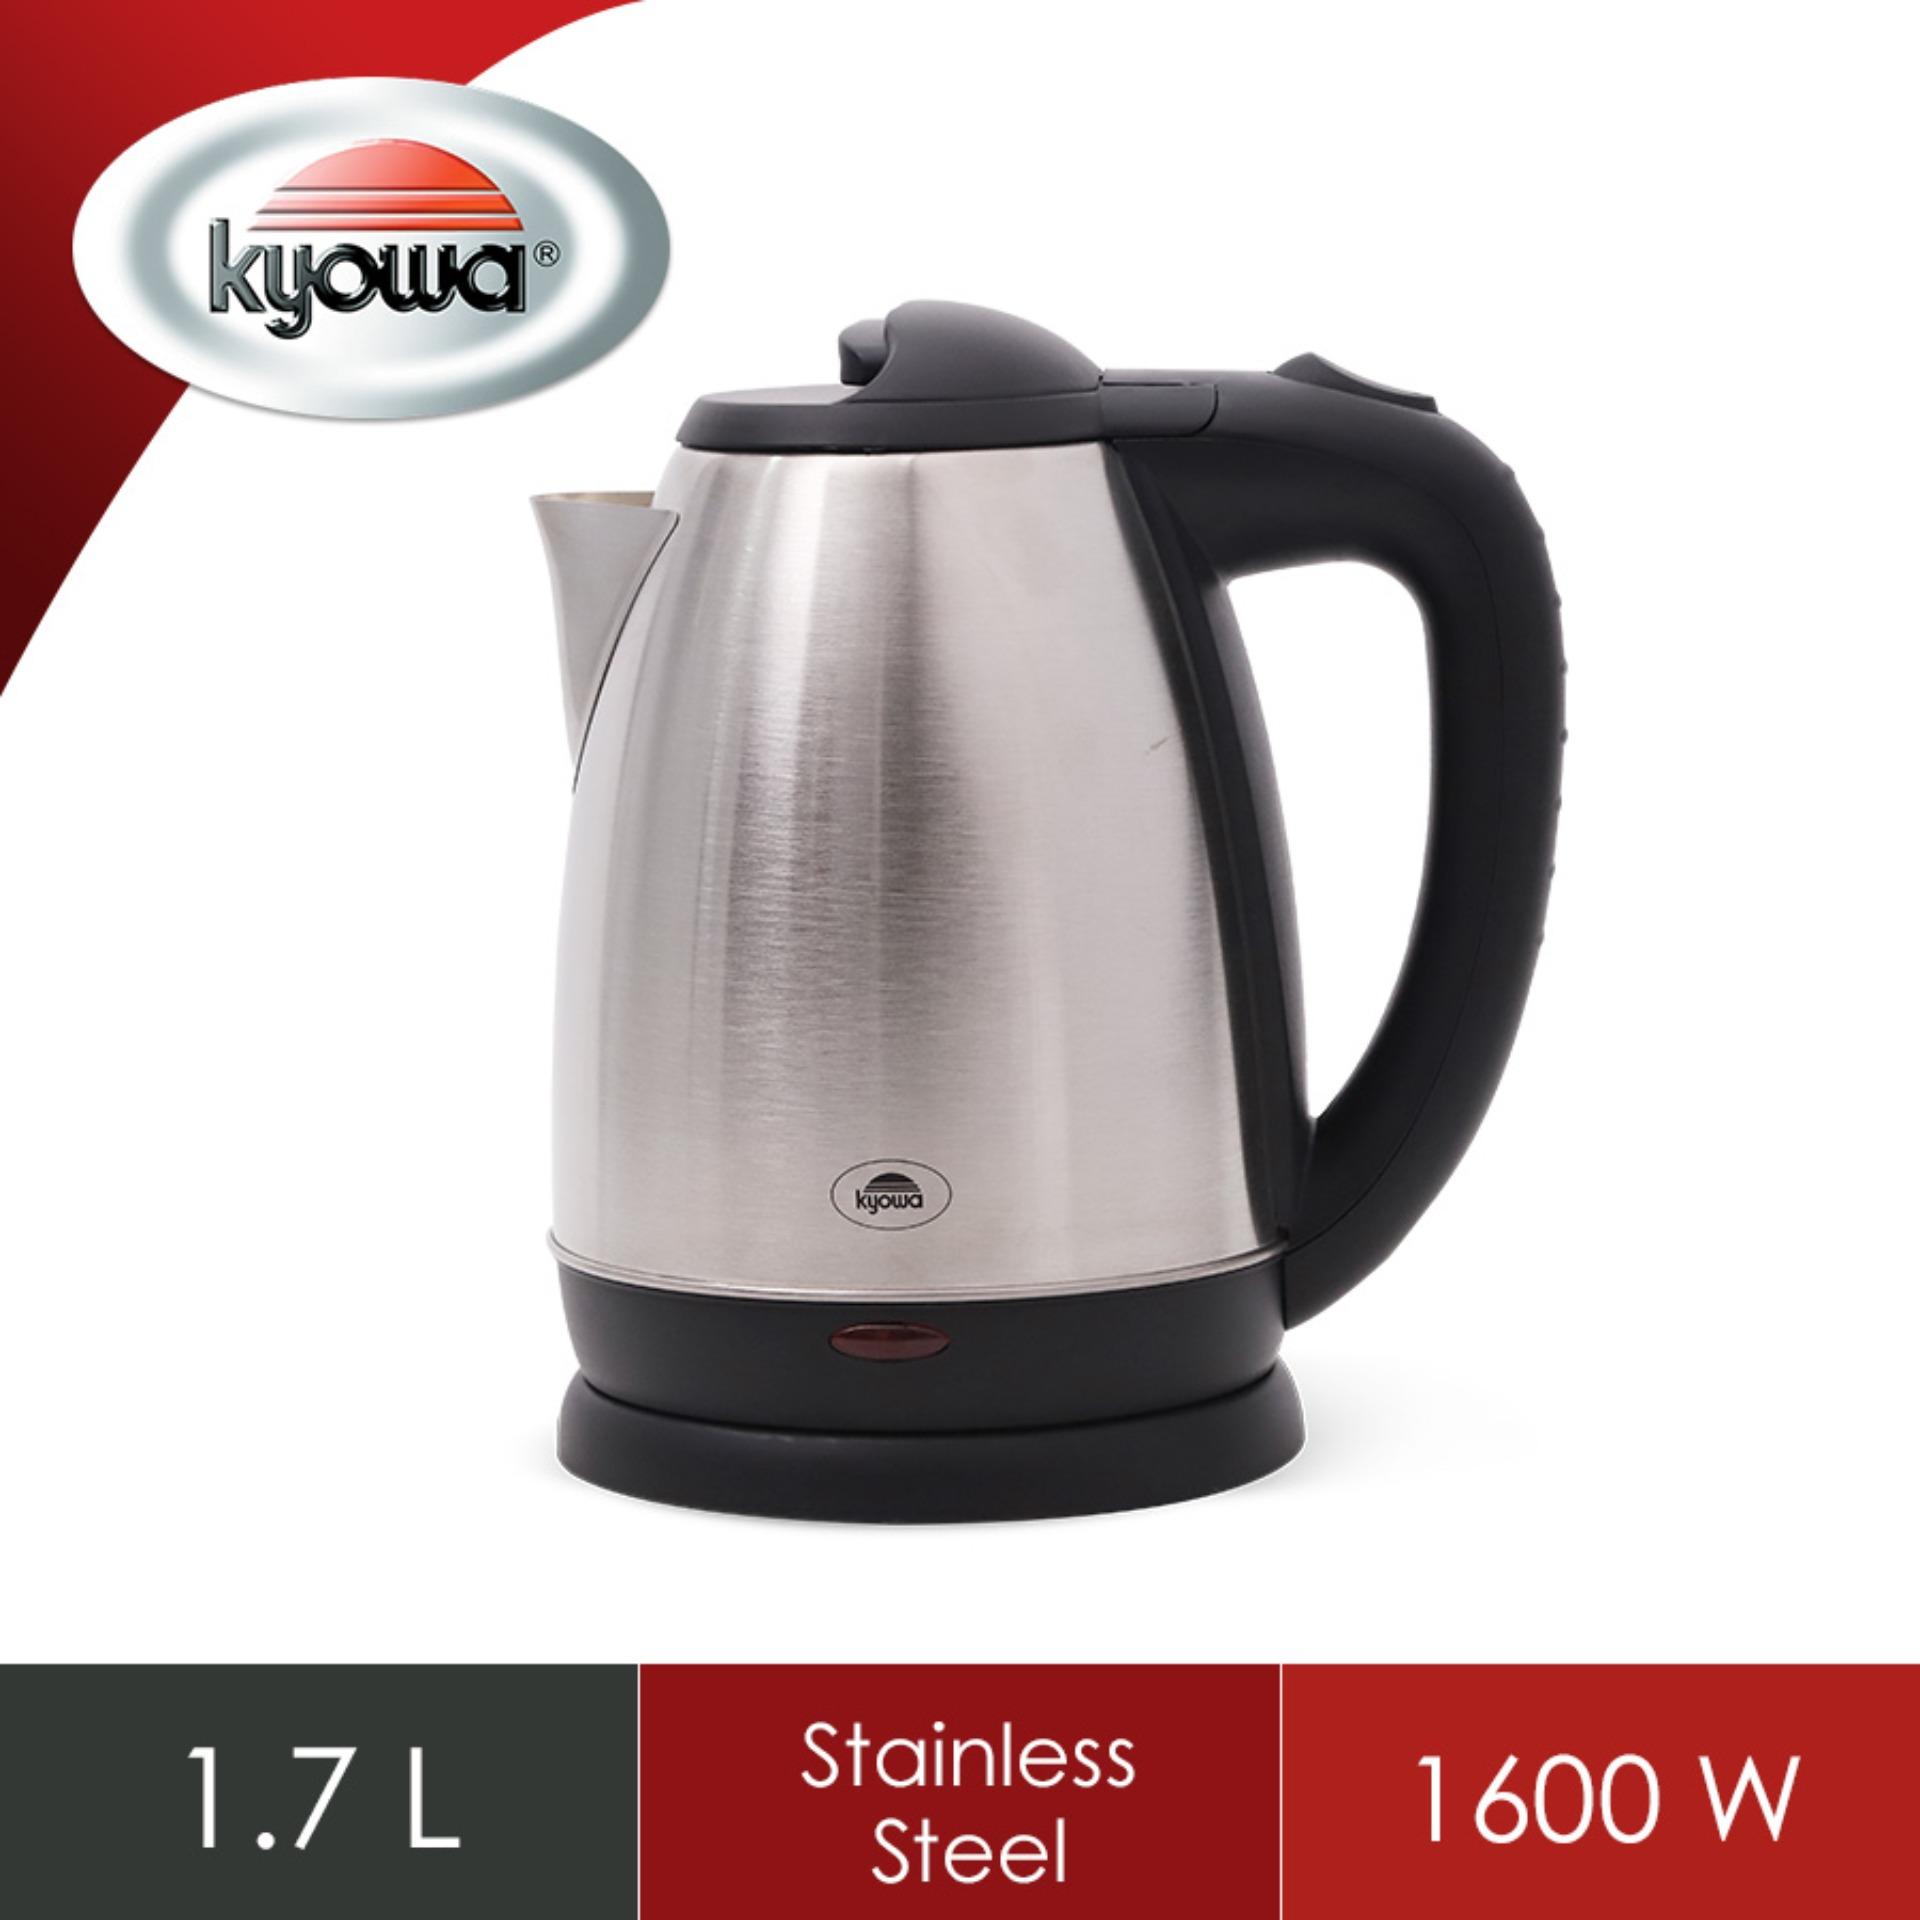 electric kettle 1.7 ltr price